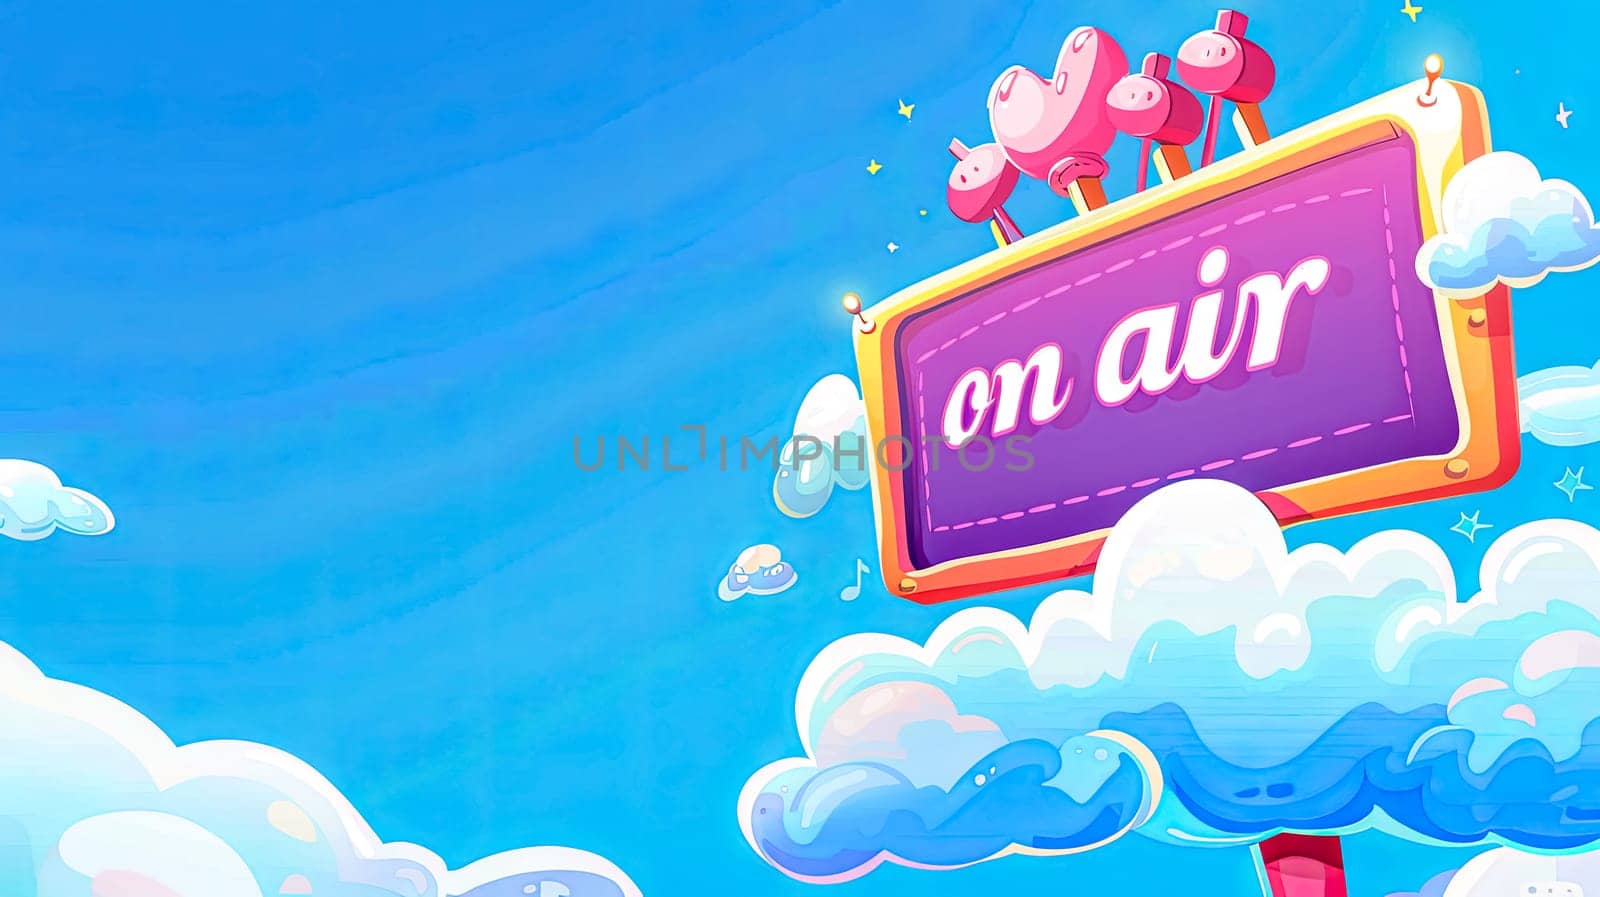 Cartoon broadcasting sign on air in cloudscape by Edophoto